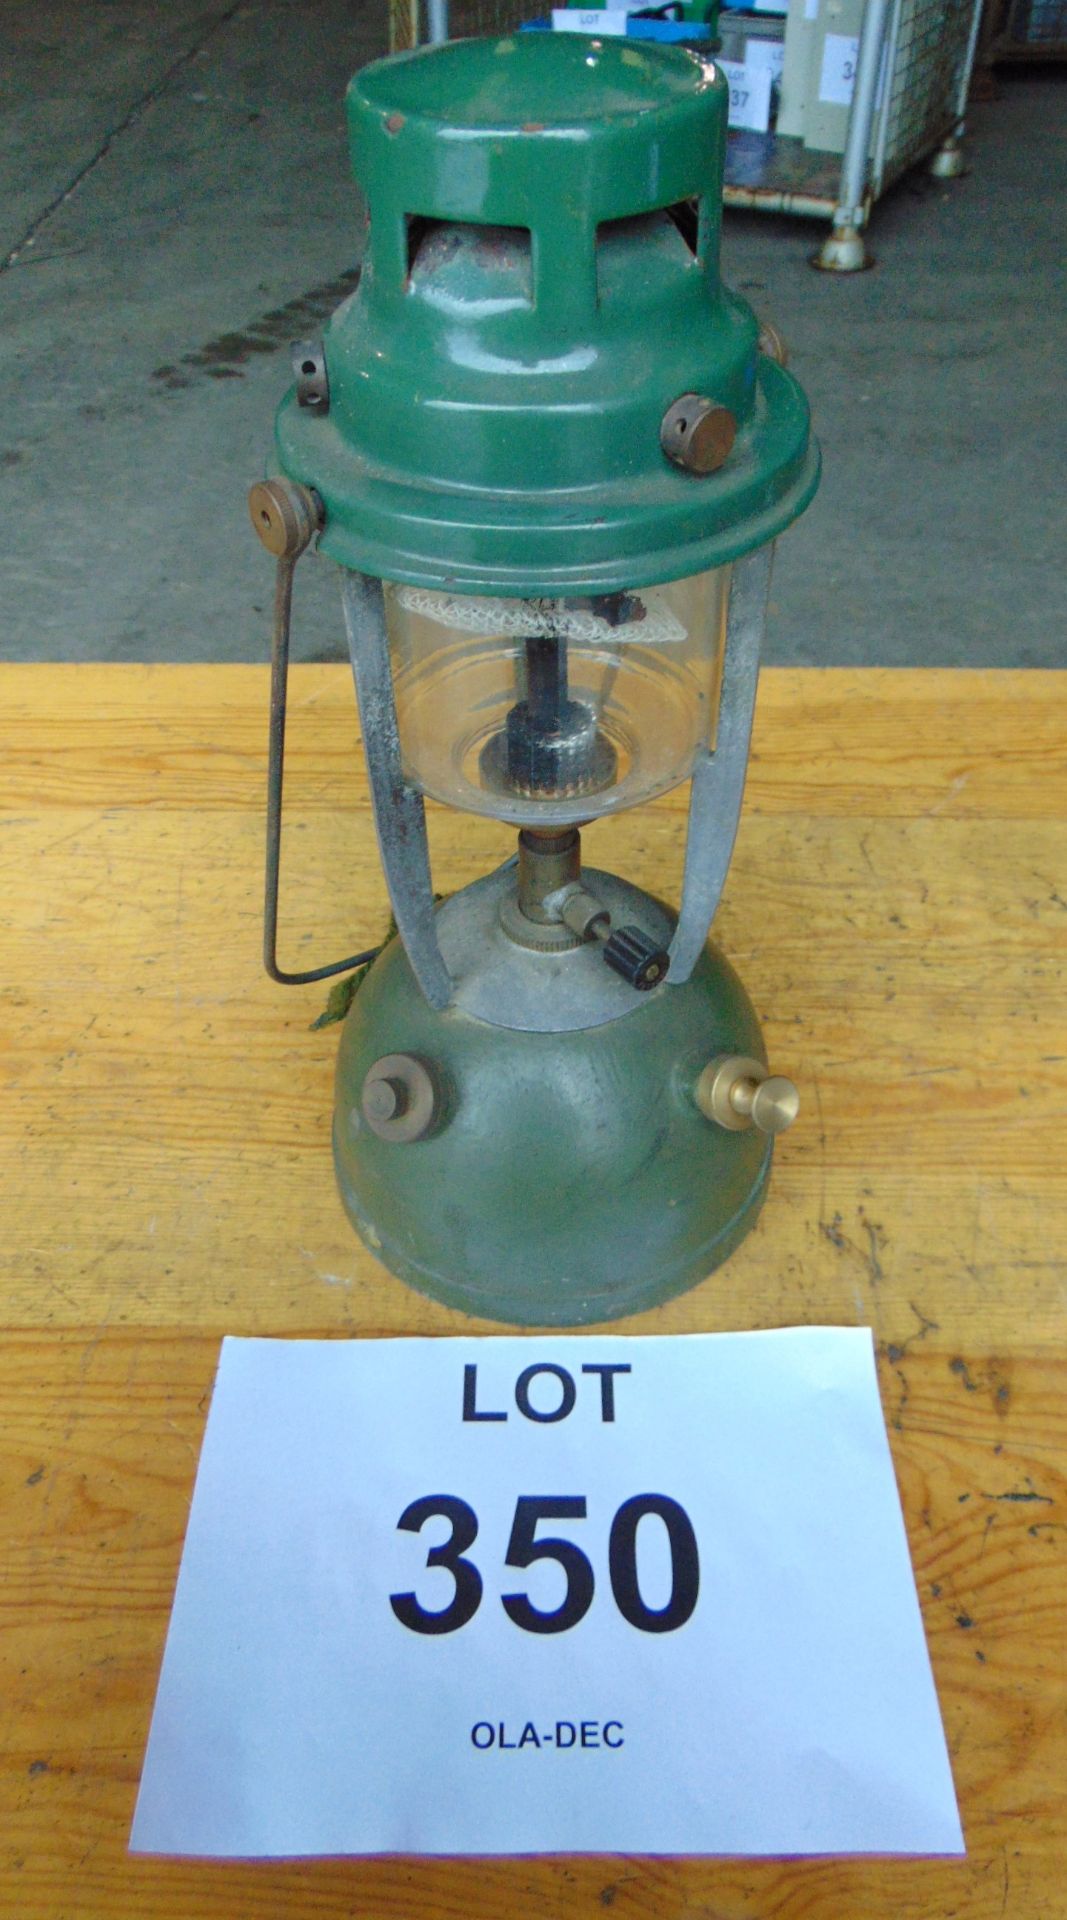 You are bidding on Vapalux British Army Tilley Lamp